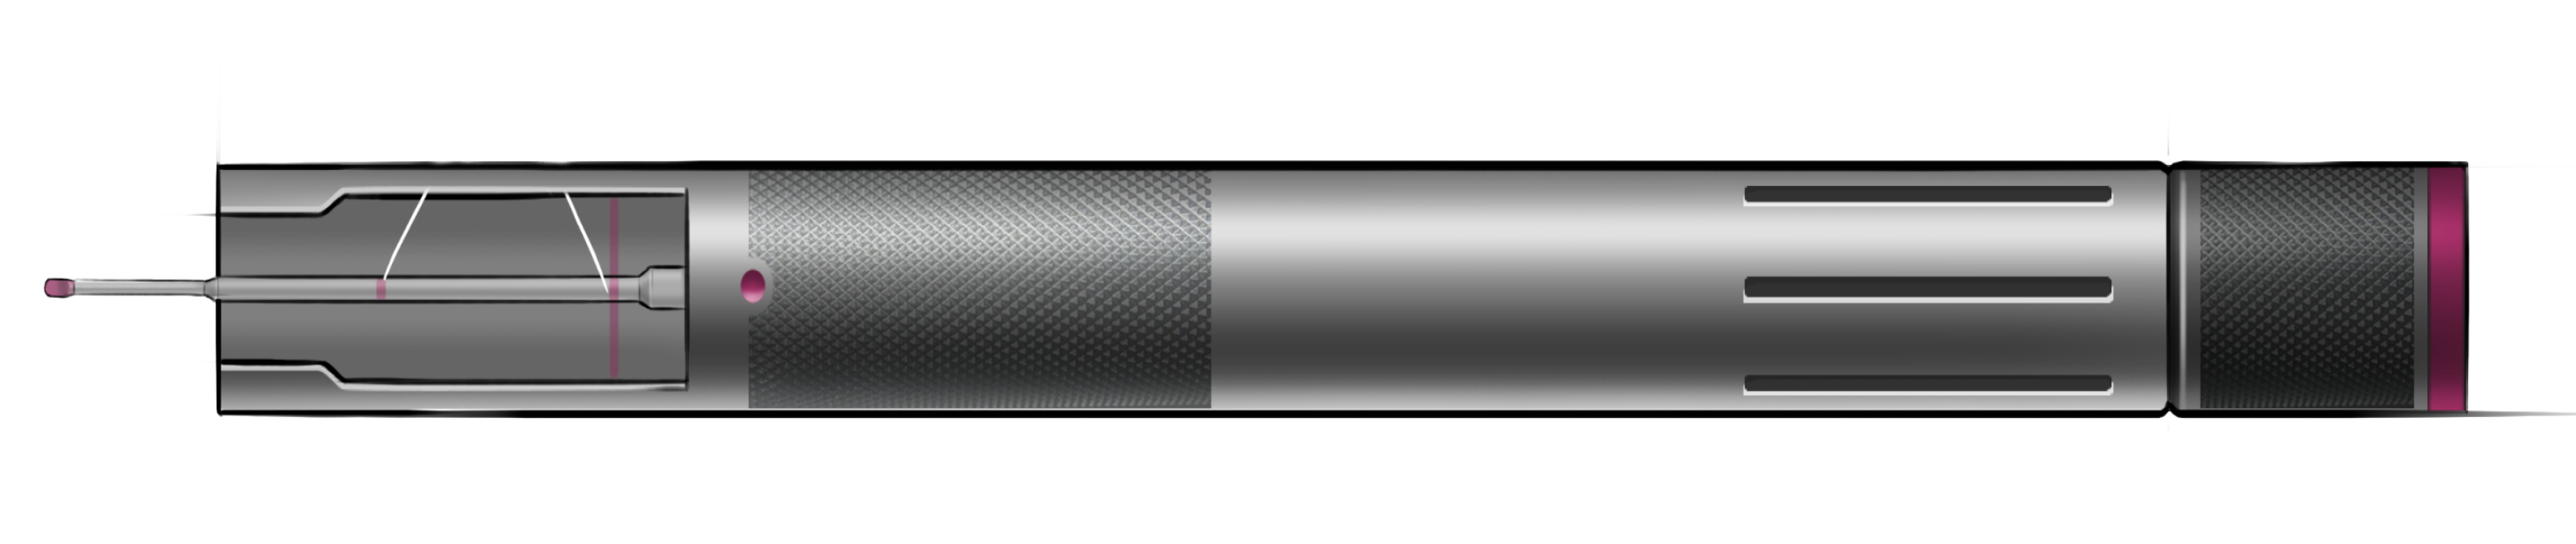 Drawing of the handle of the Monarch IV device with part of the inside exposed.